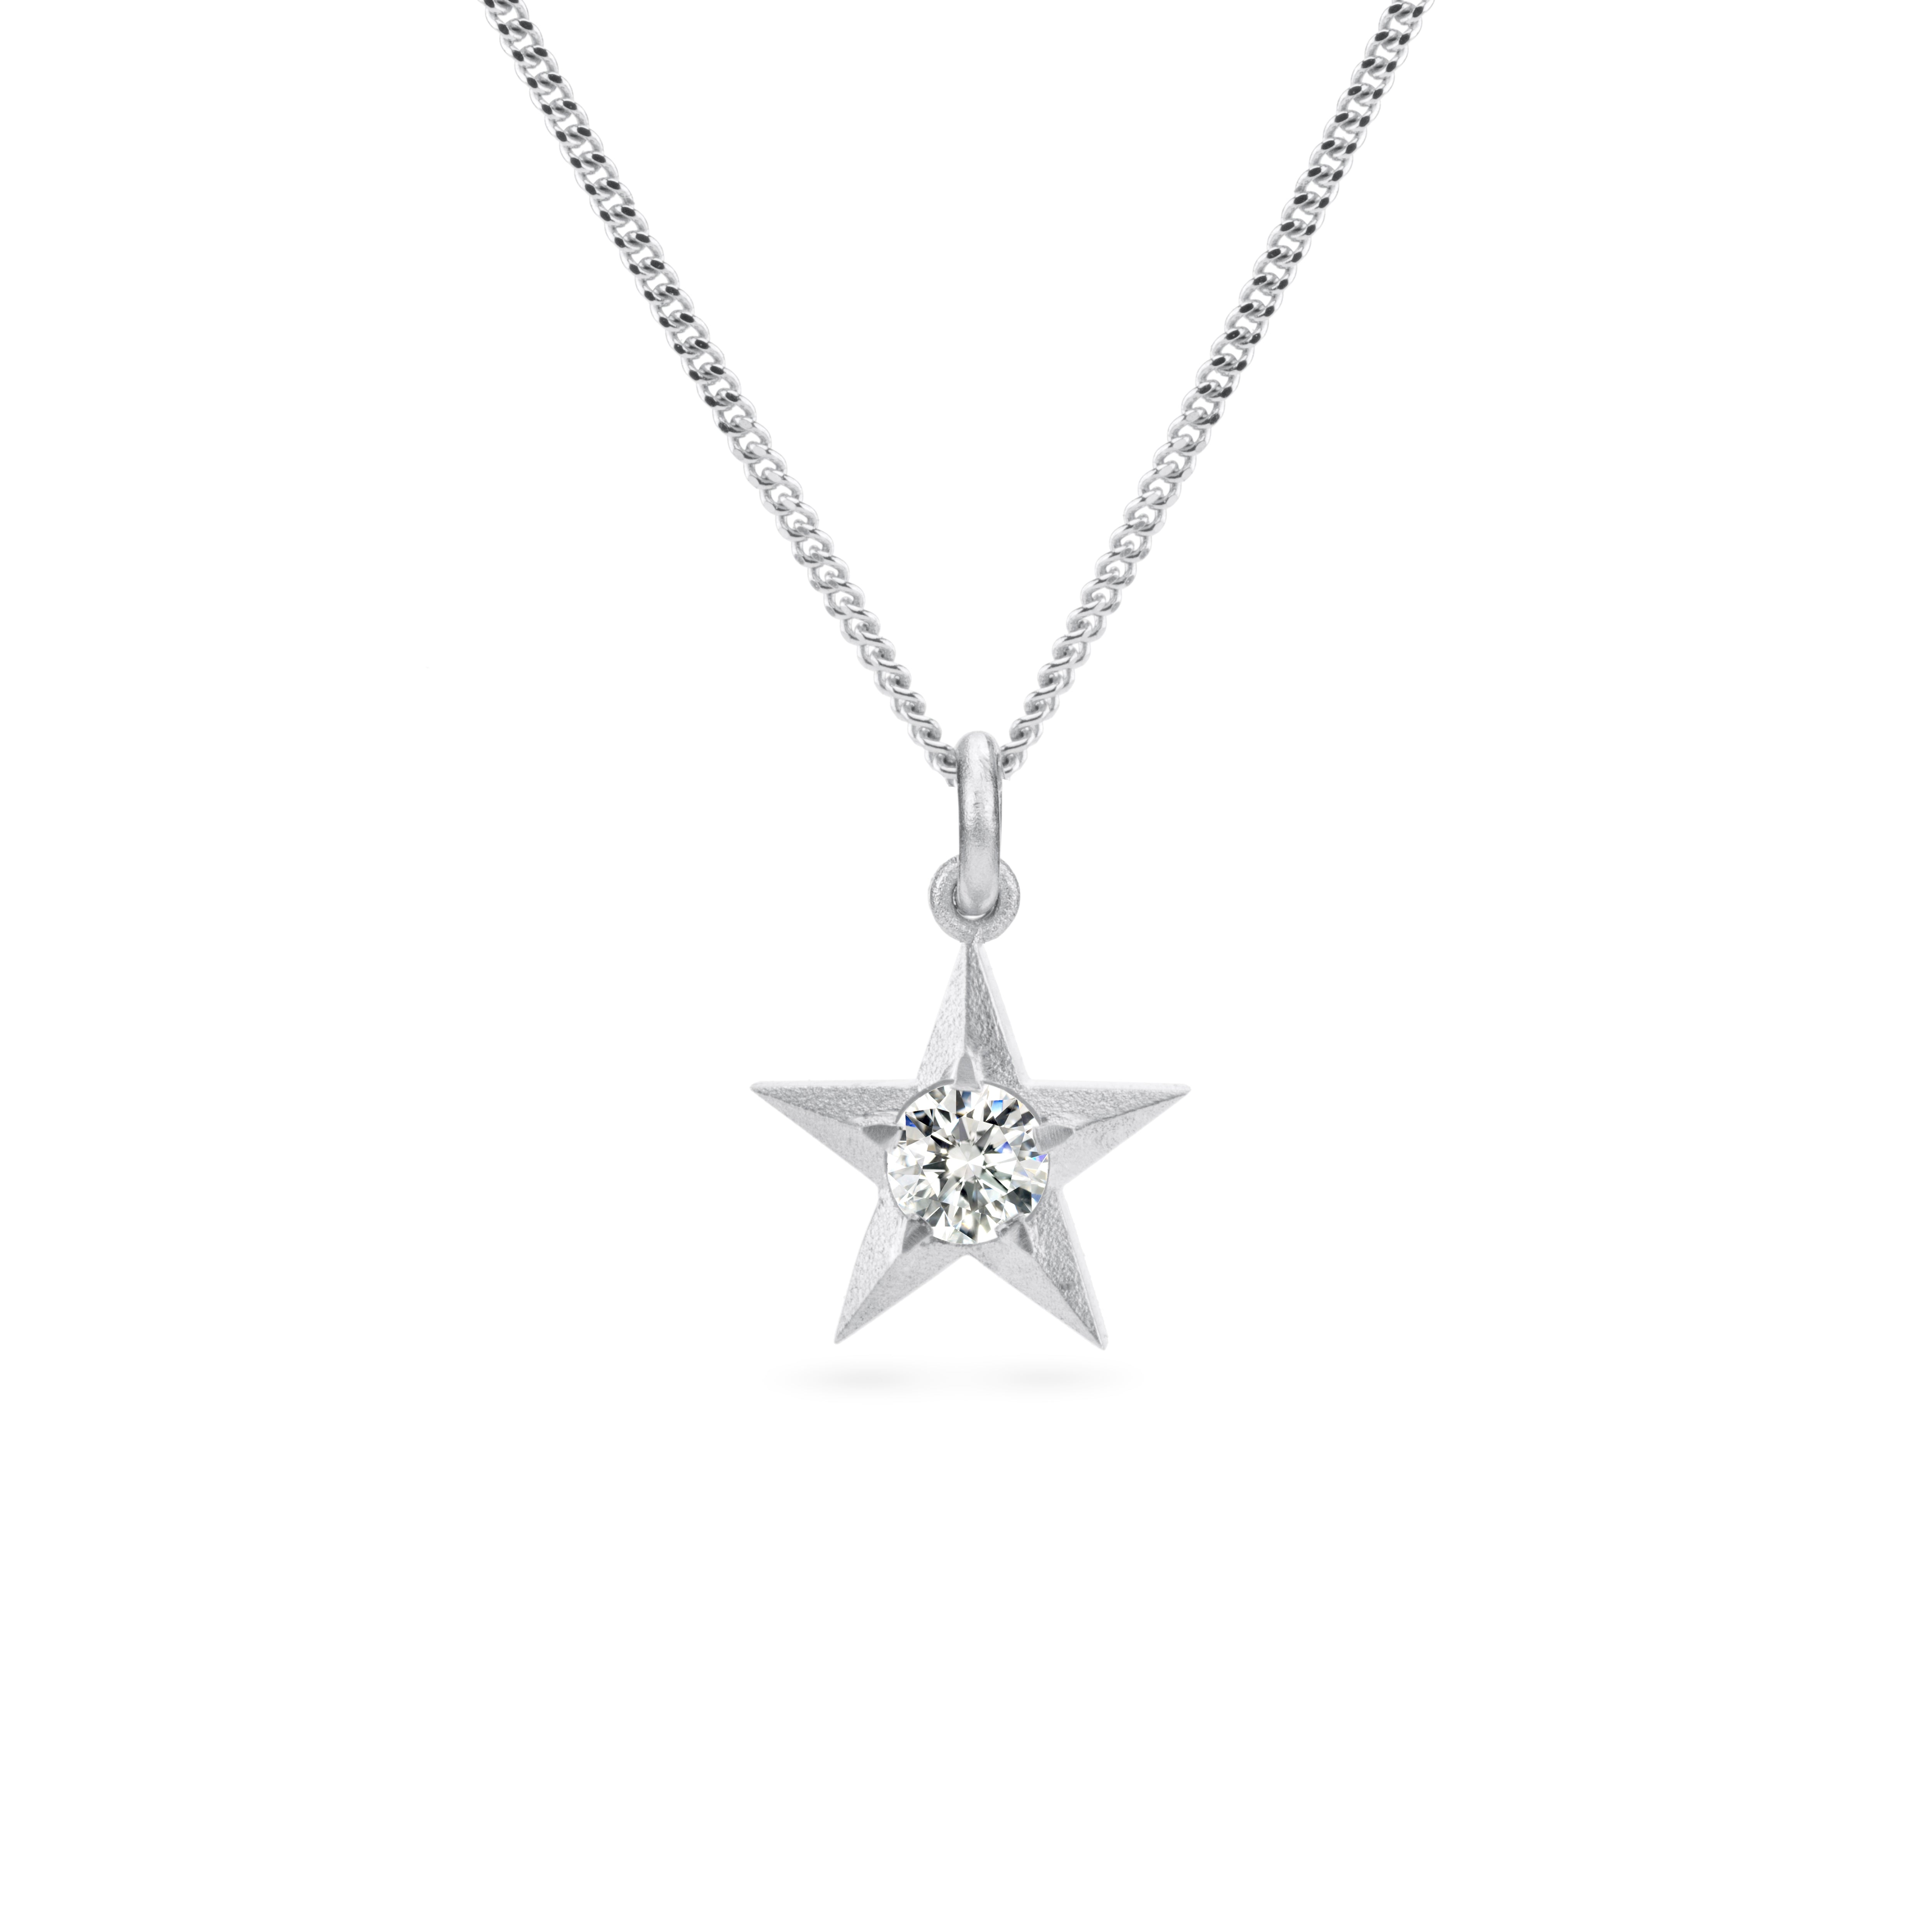 Stella 18ct White Gold Star Necklace with Diamonds